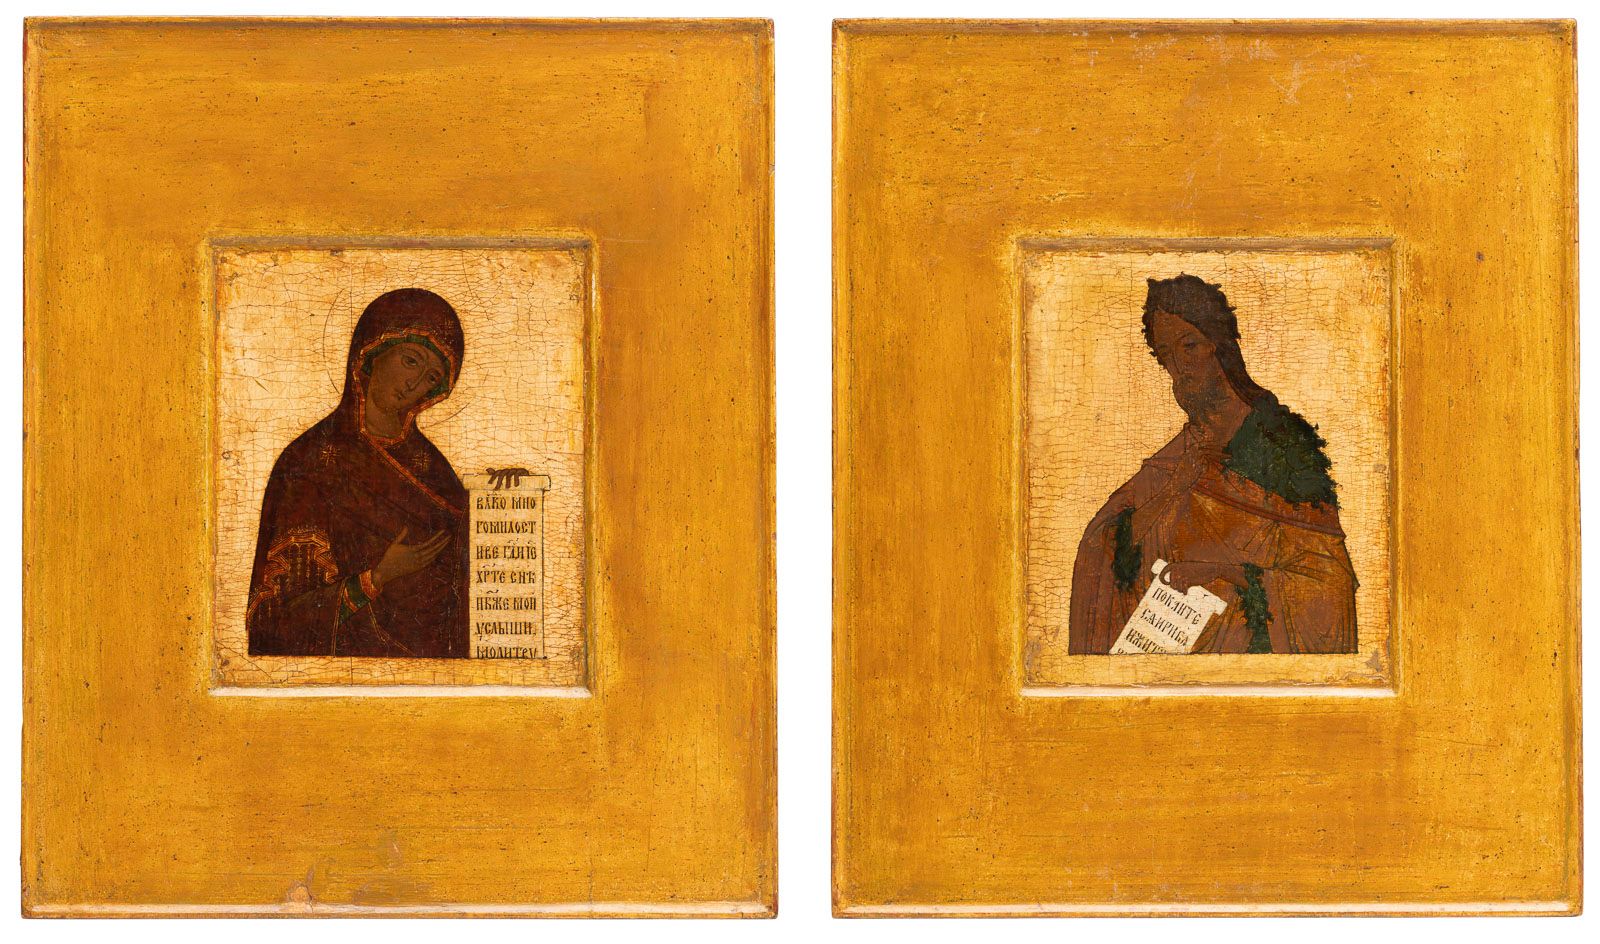 A PAIR OF ICONS FROM A DEISIS SHOWING THE MOTHER OF GOD AND A PAIR OF ICONS FROM&hellip;